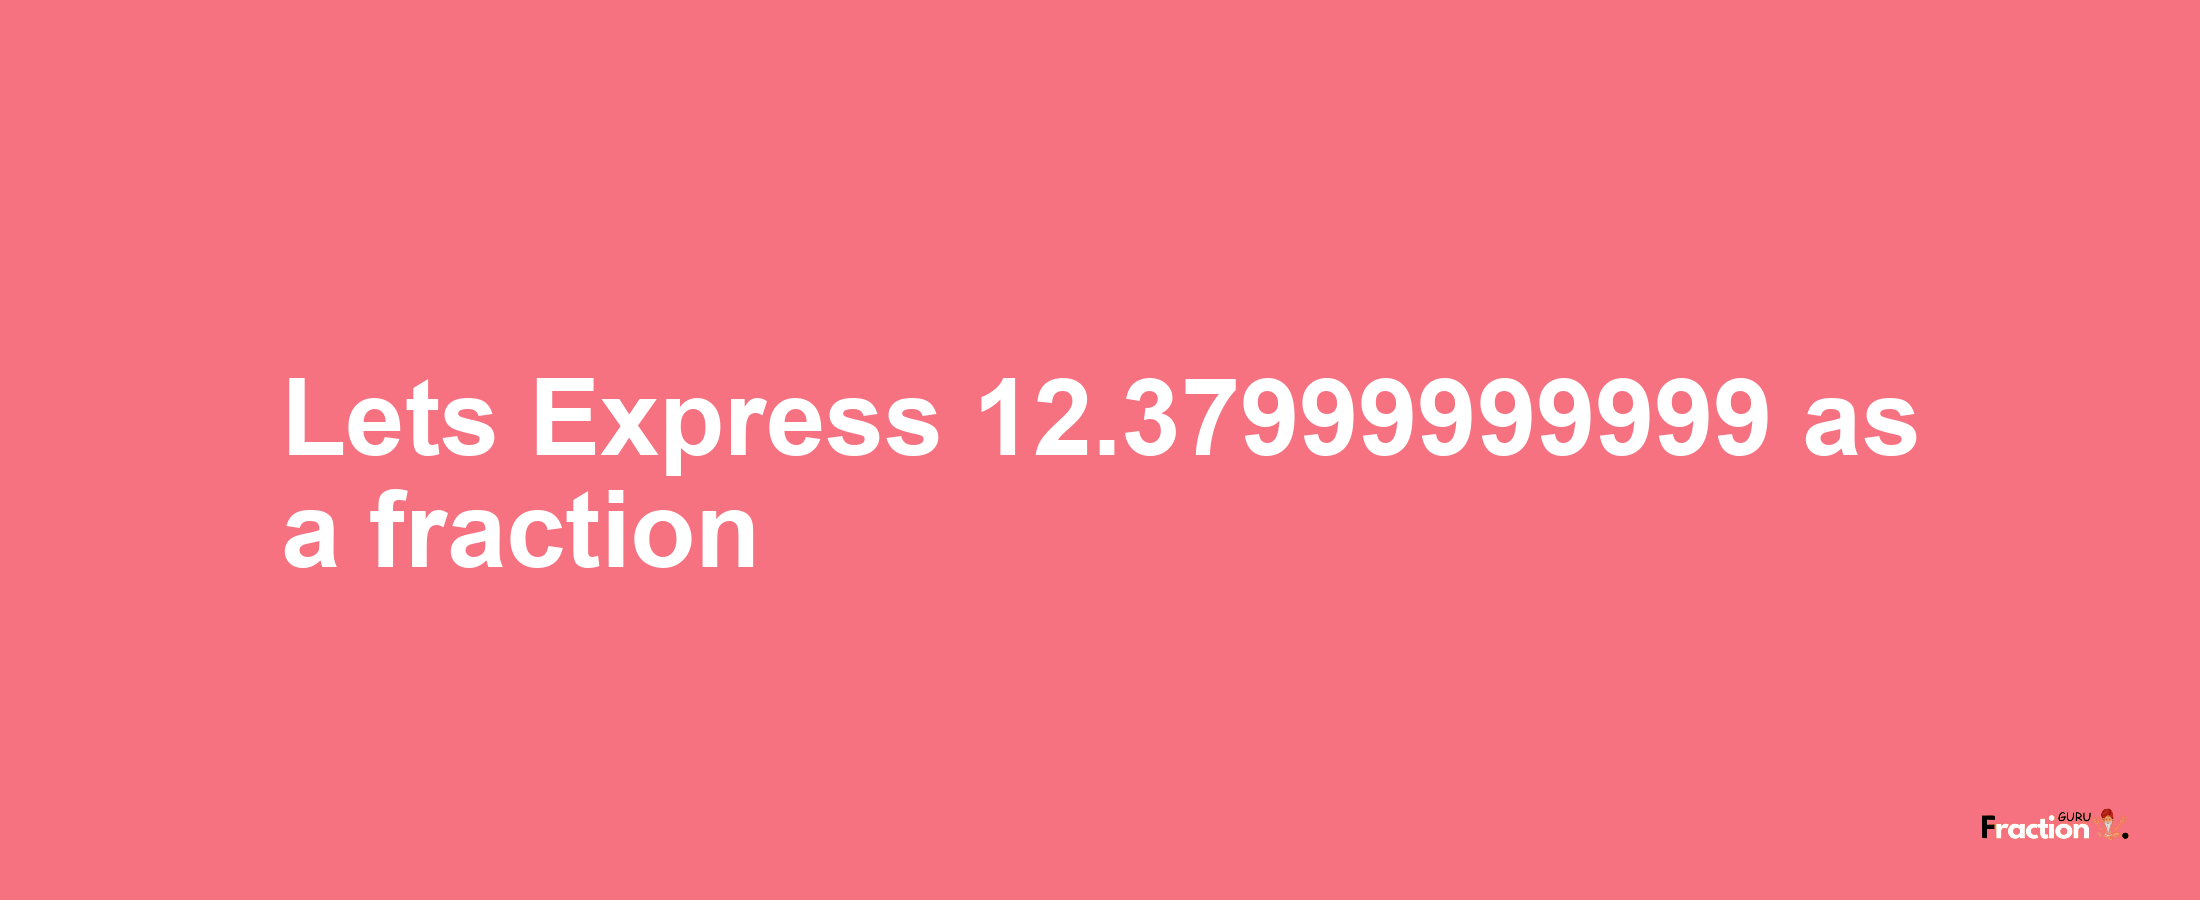 Lets Express 12.37999999999 as afraction